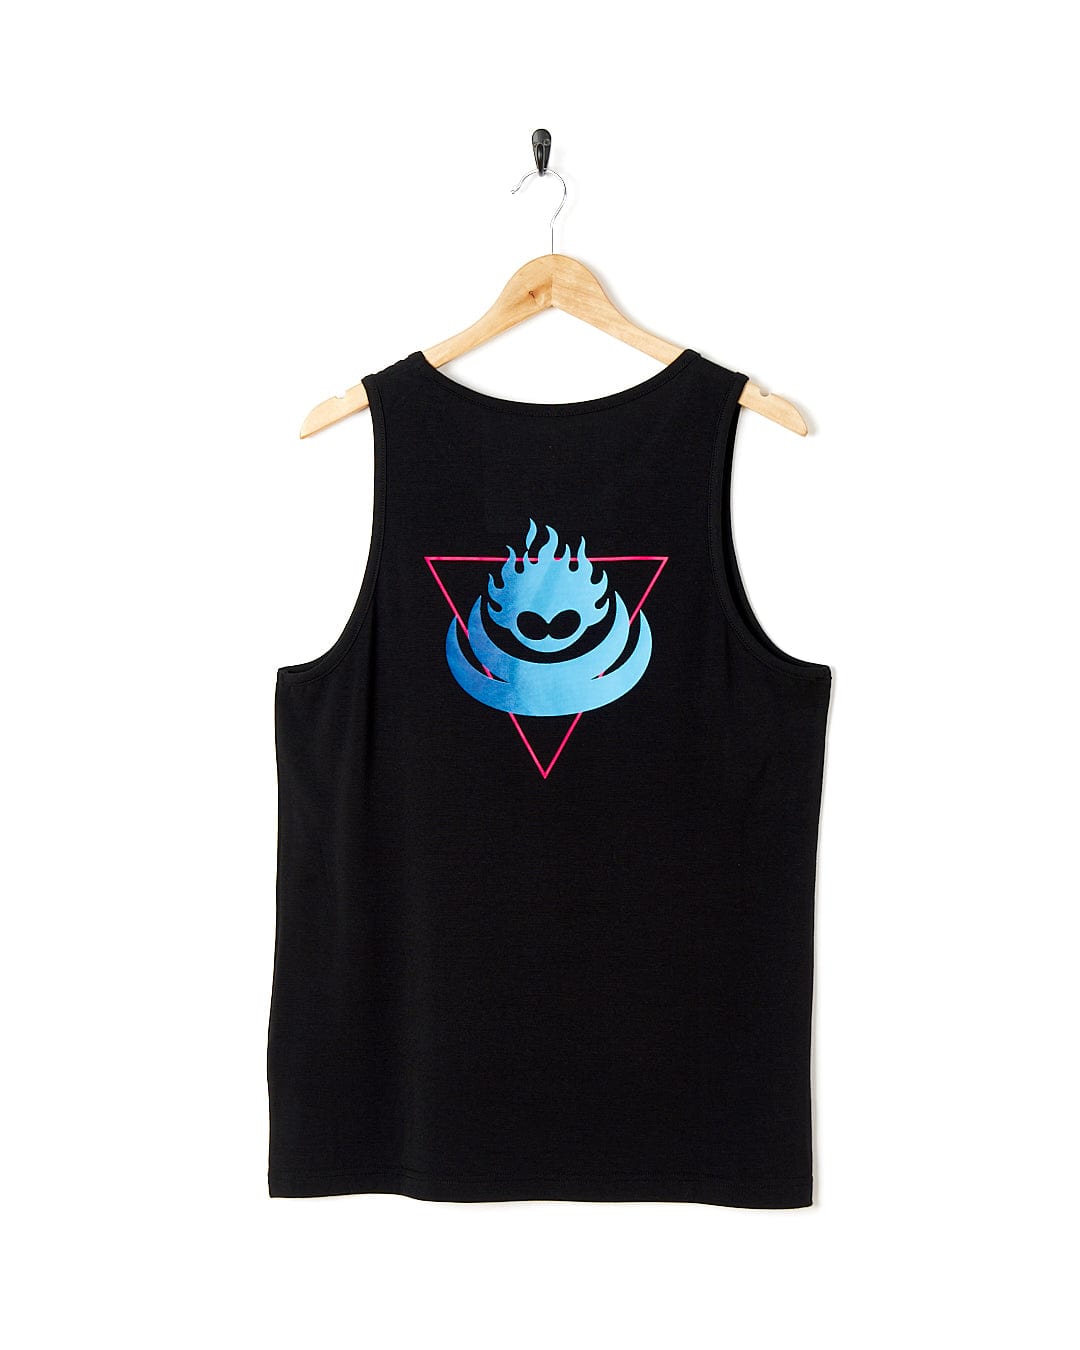 A Saltrock Flame Tri - Mens Recycled Vest - Black with a blue and blue logo on it.